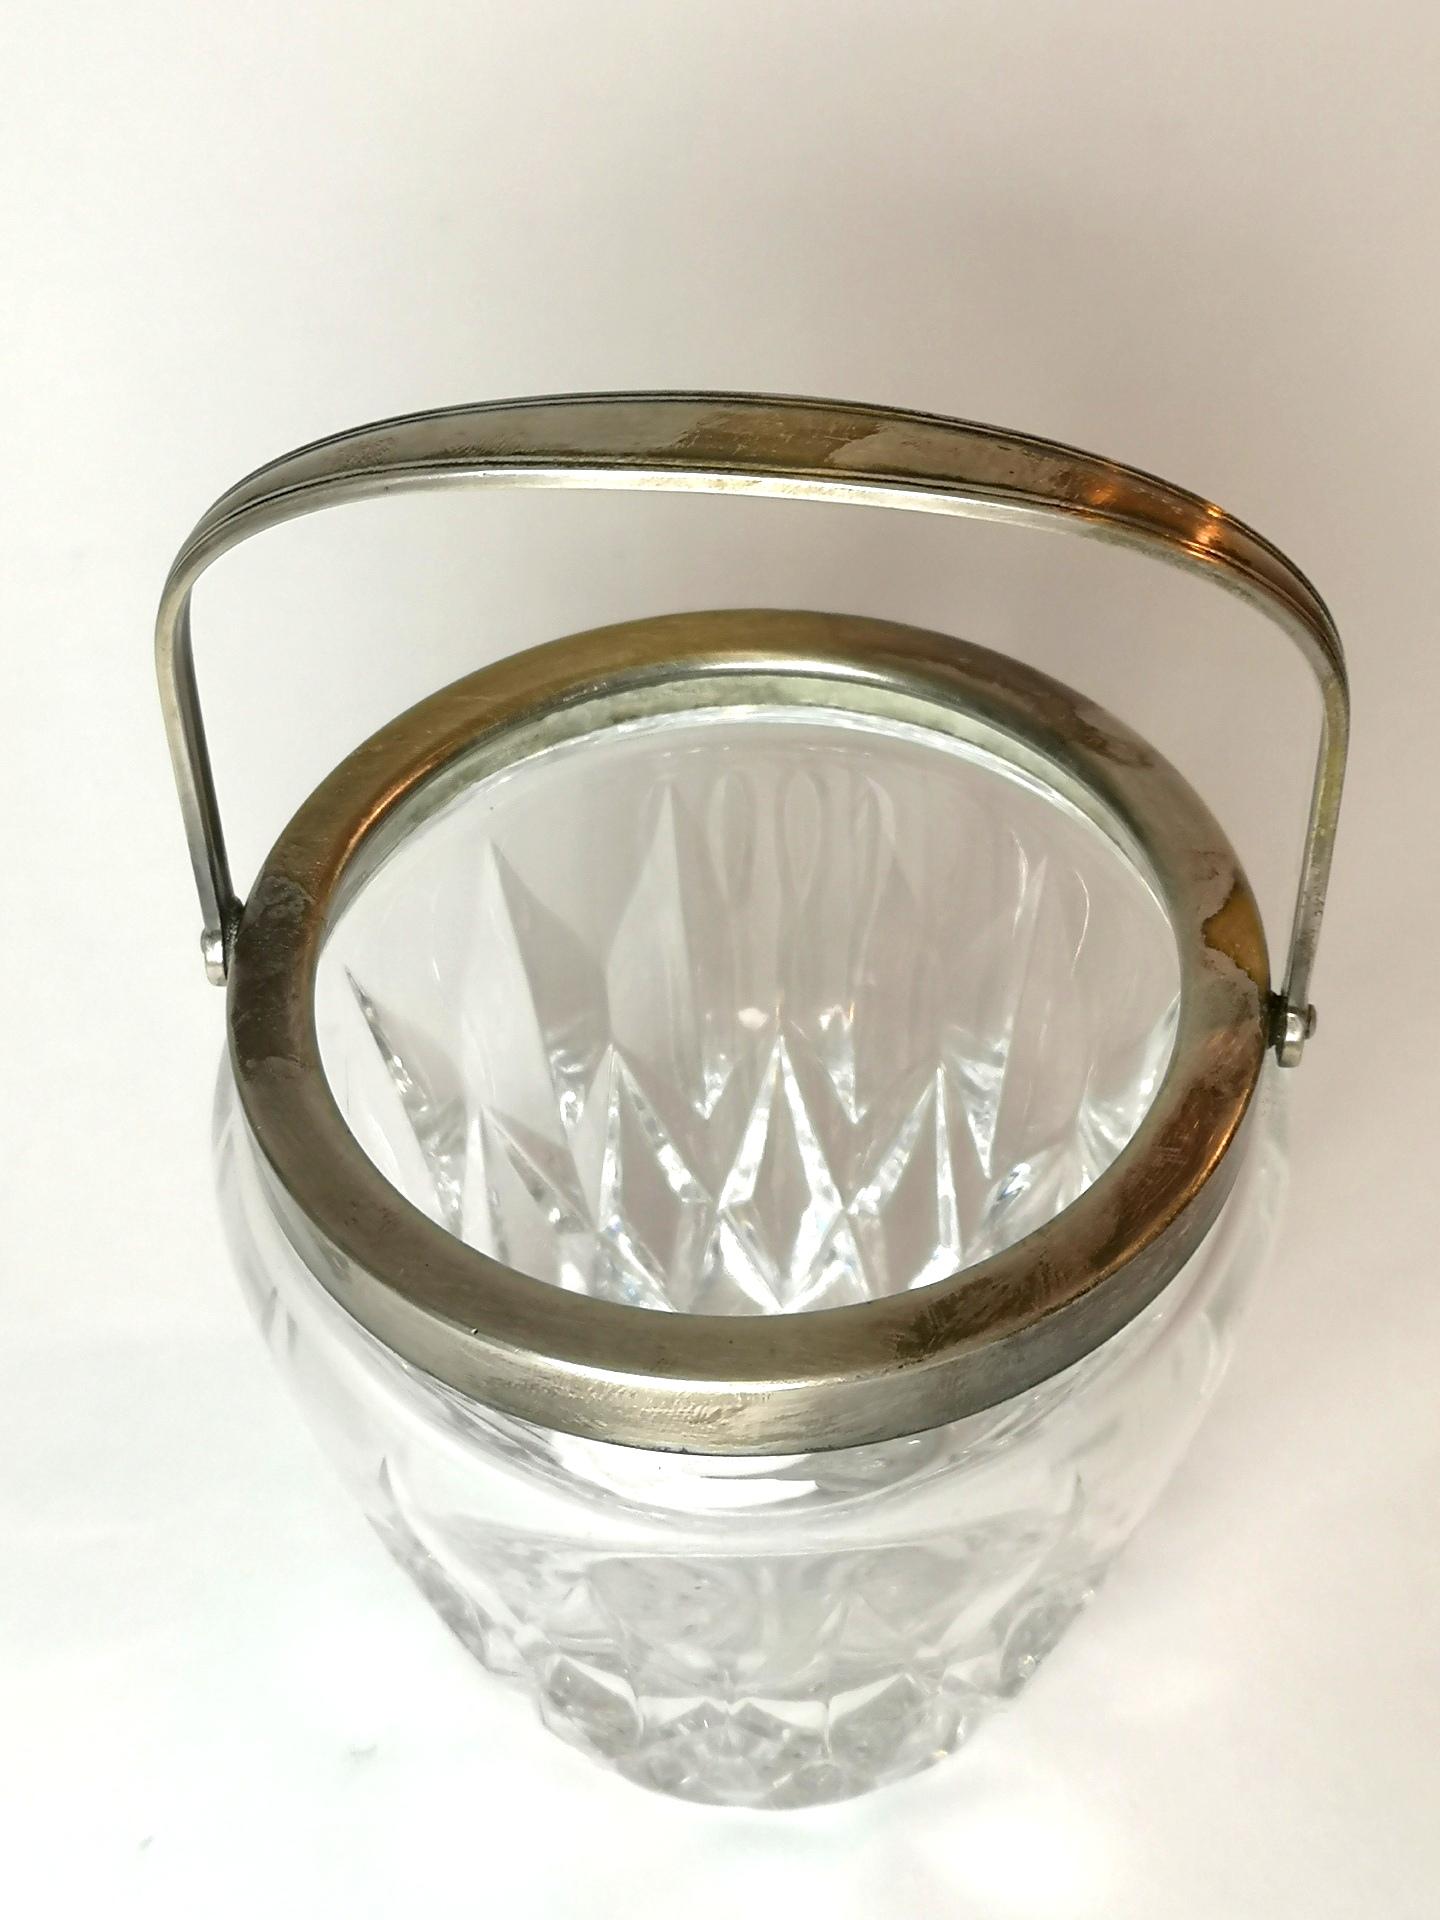 Silver plated brass handle and chiseled crystal glass are the main features of the small ice bucket. This glass piece was made in the 1970s by WMF and is in good condition.
This item comes professionally packaged, thoroughly wrapped in paper,